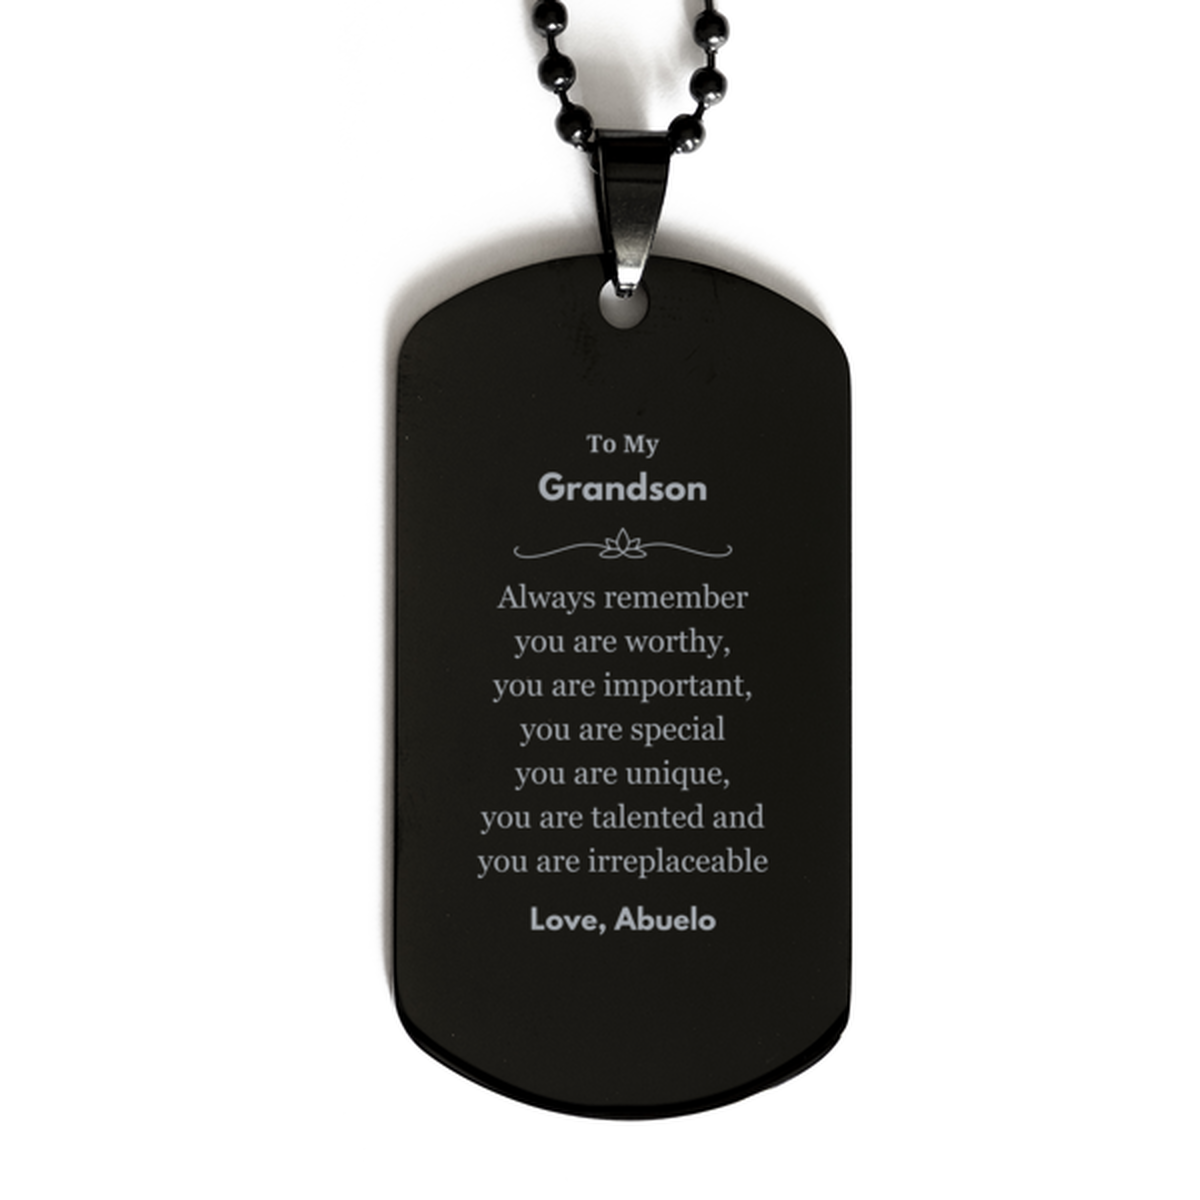 Grandson Birthday Gifts from Abuelo, Inspirational Black Dog Tag for Grandson Christmas Graduation Gifts for Grandson Always remember you are worthy, you are important. Love, Abuelo